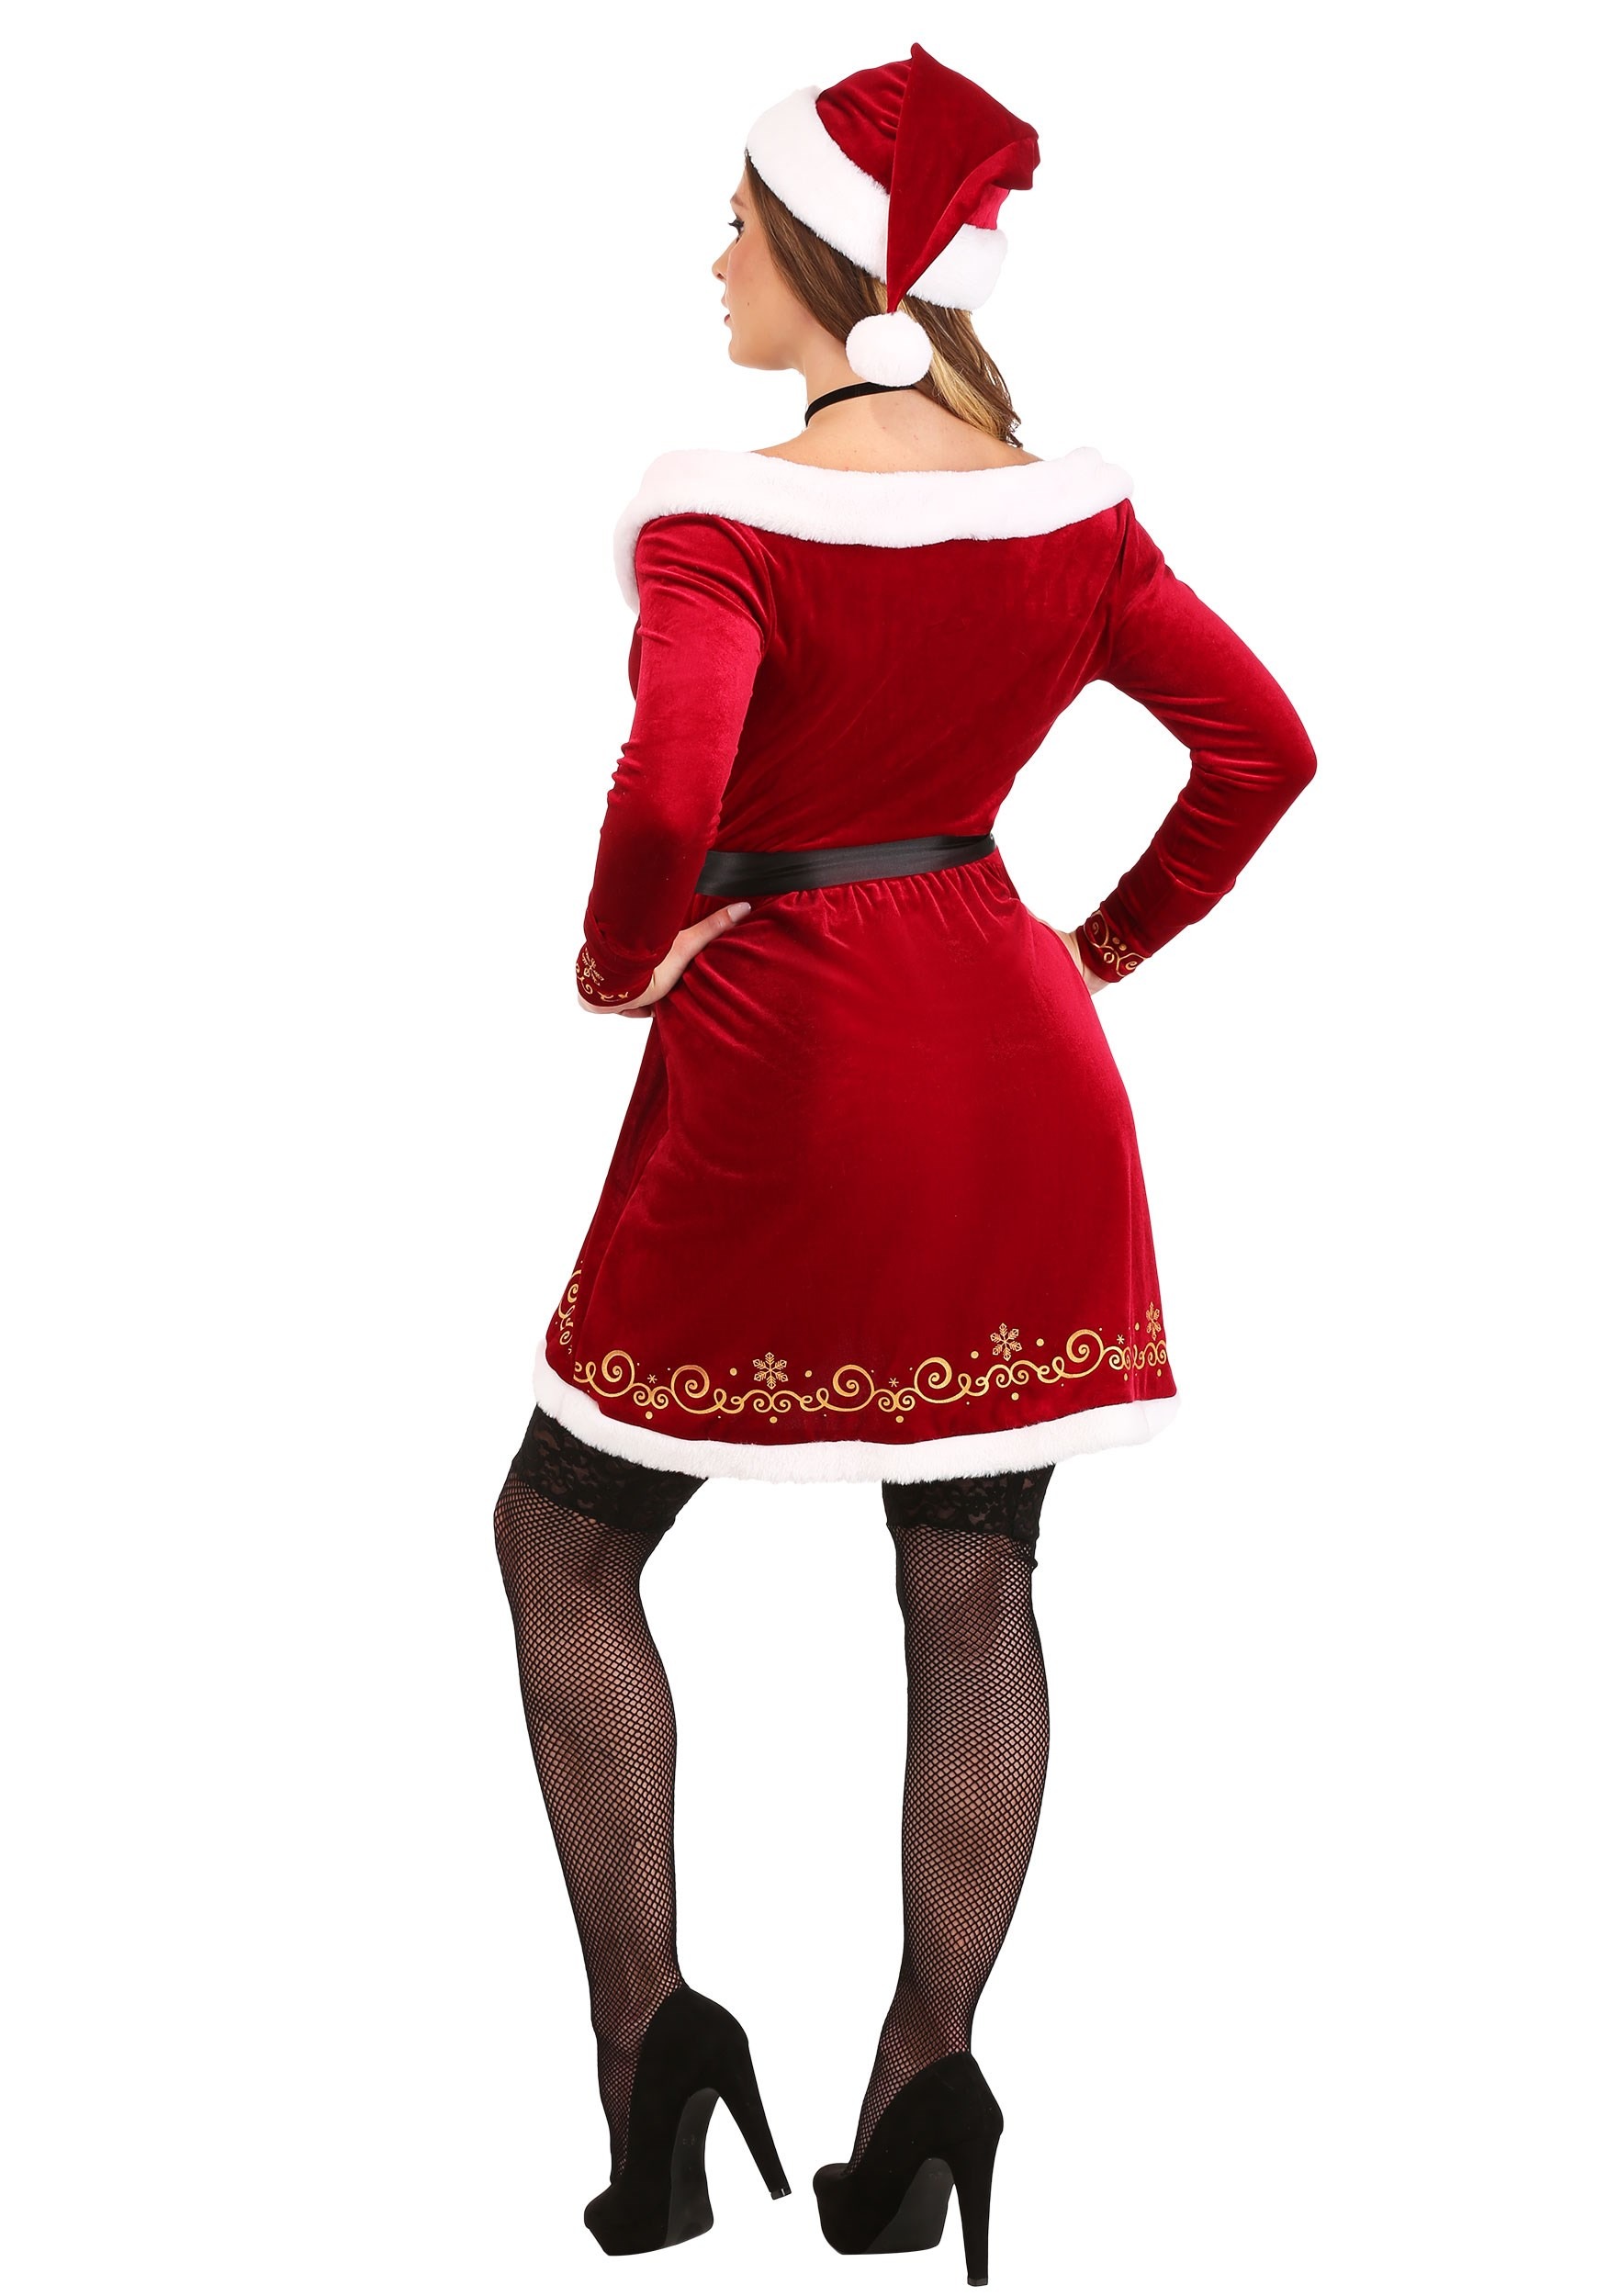 Sexy Mrs Claus Costume For Women